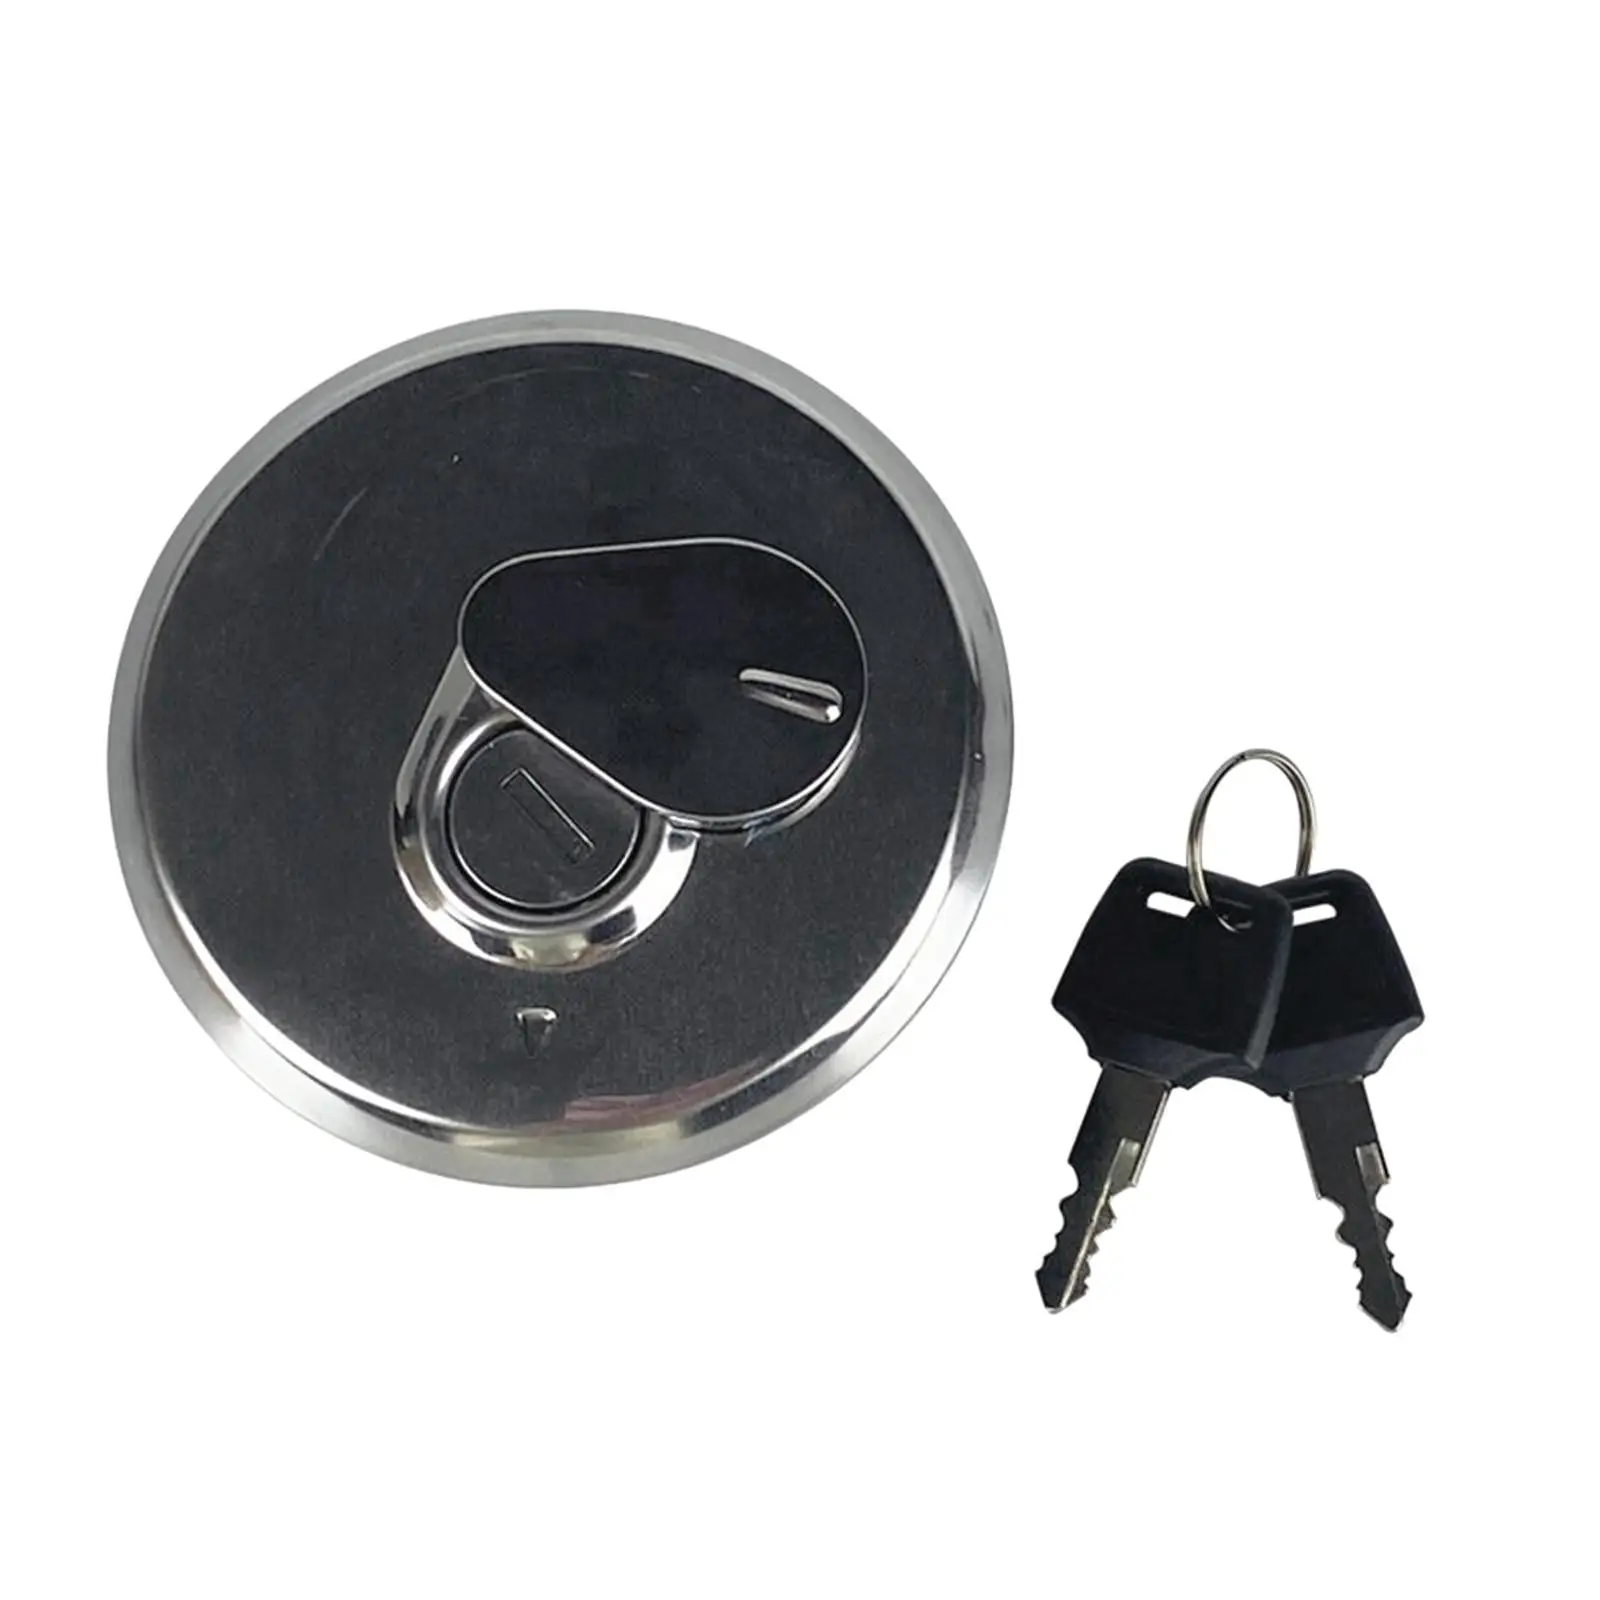 CNC Aluminum Motorcycle Fuel Gas Tank Cap Cover with 2 Keys Replaces for Suzuki